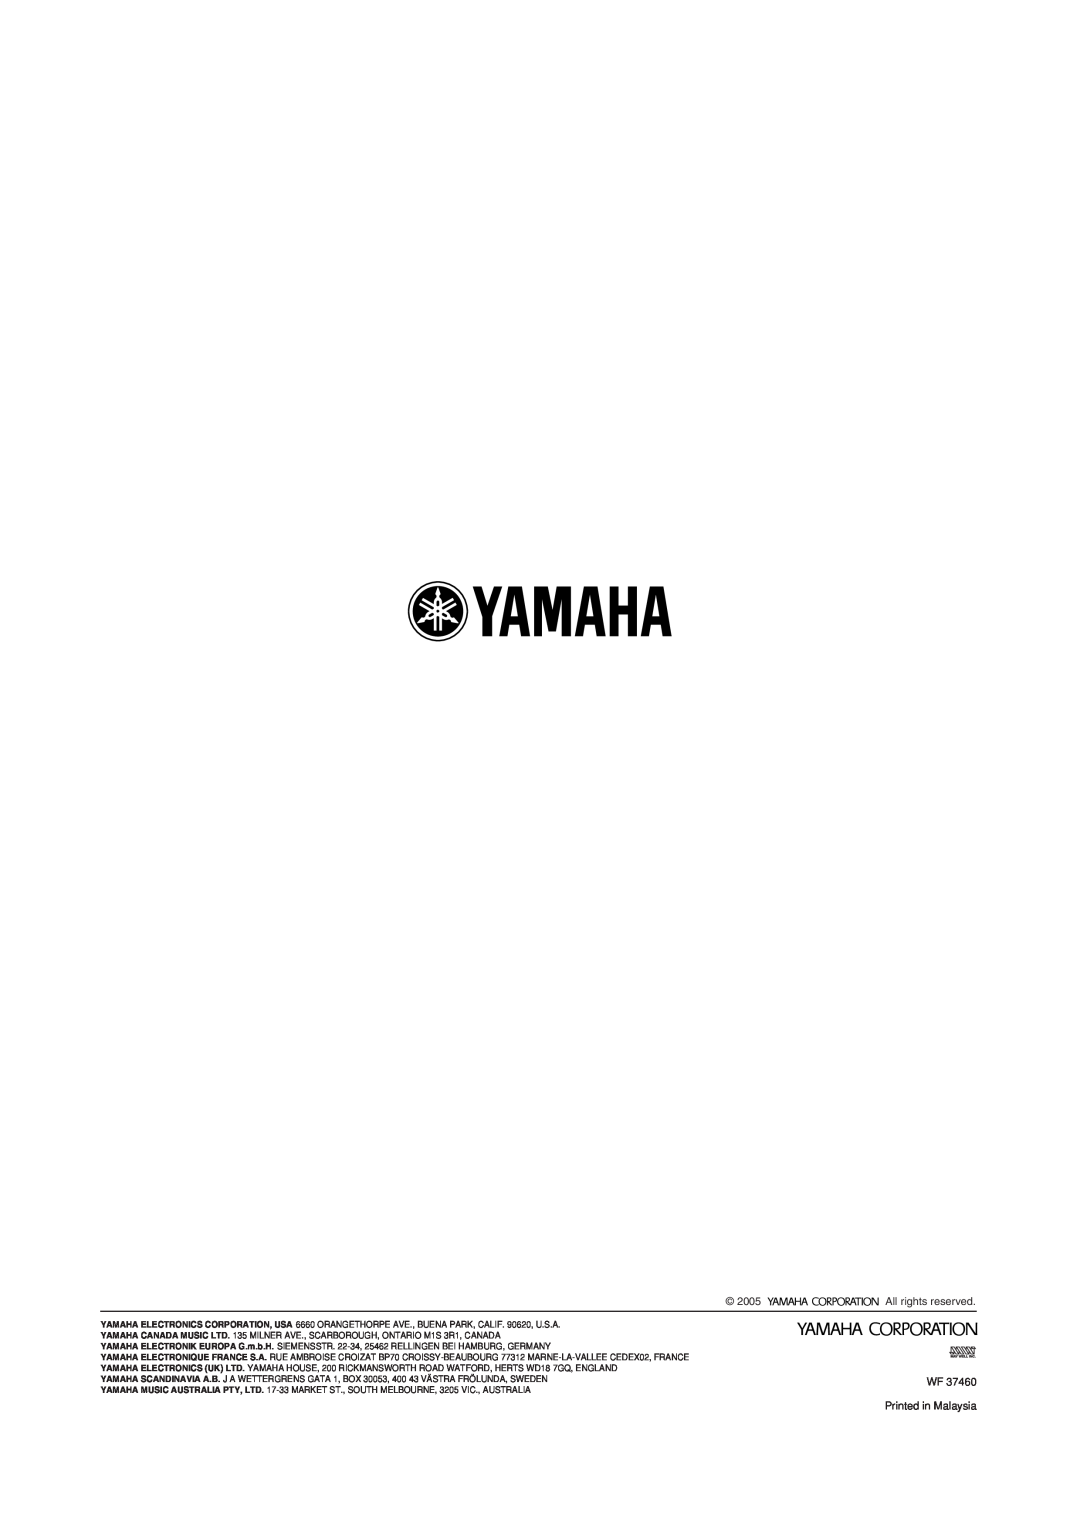 Yamaha MCX-2000 setup guide All rights reserved 